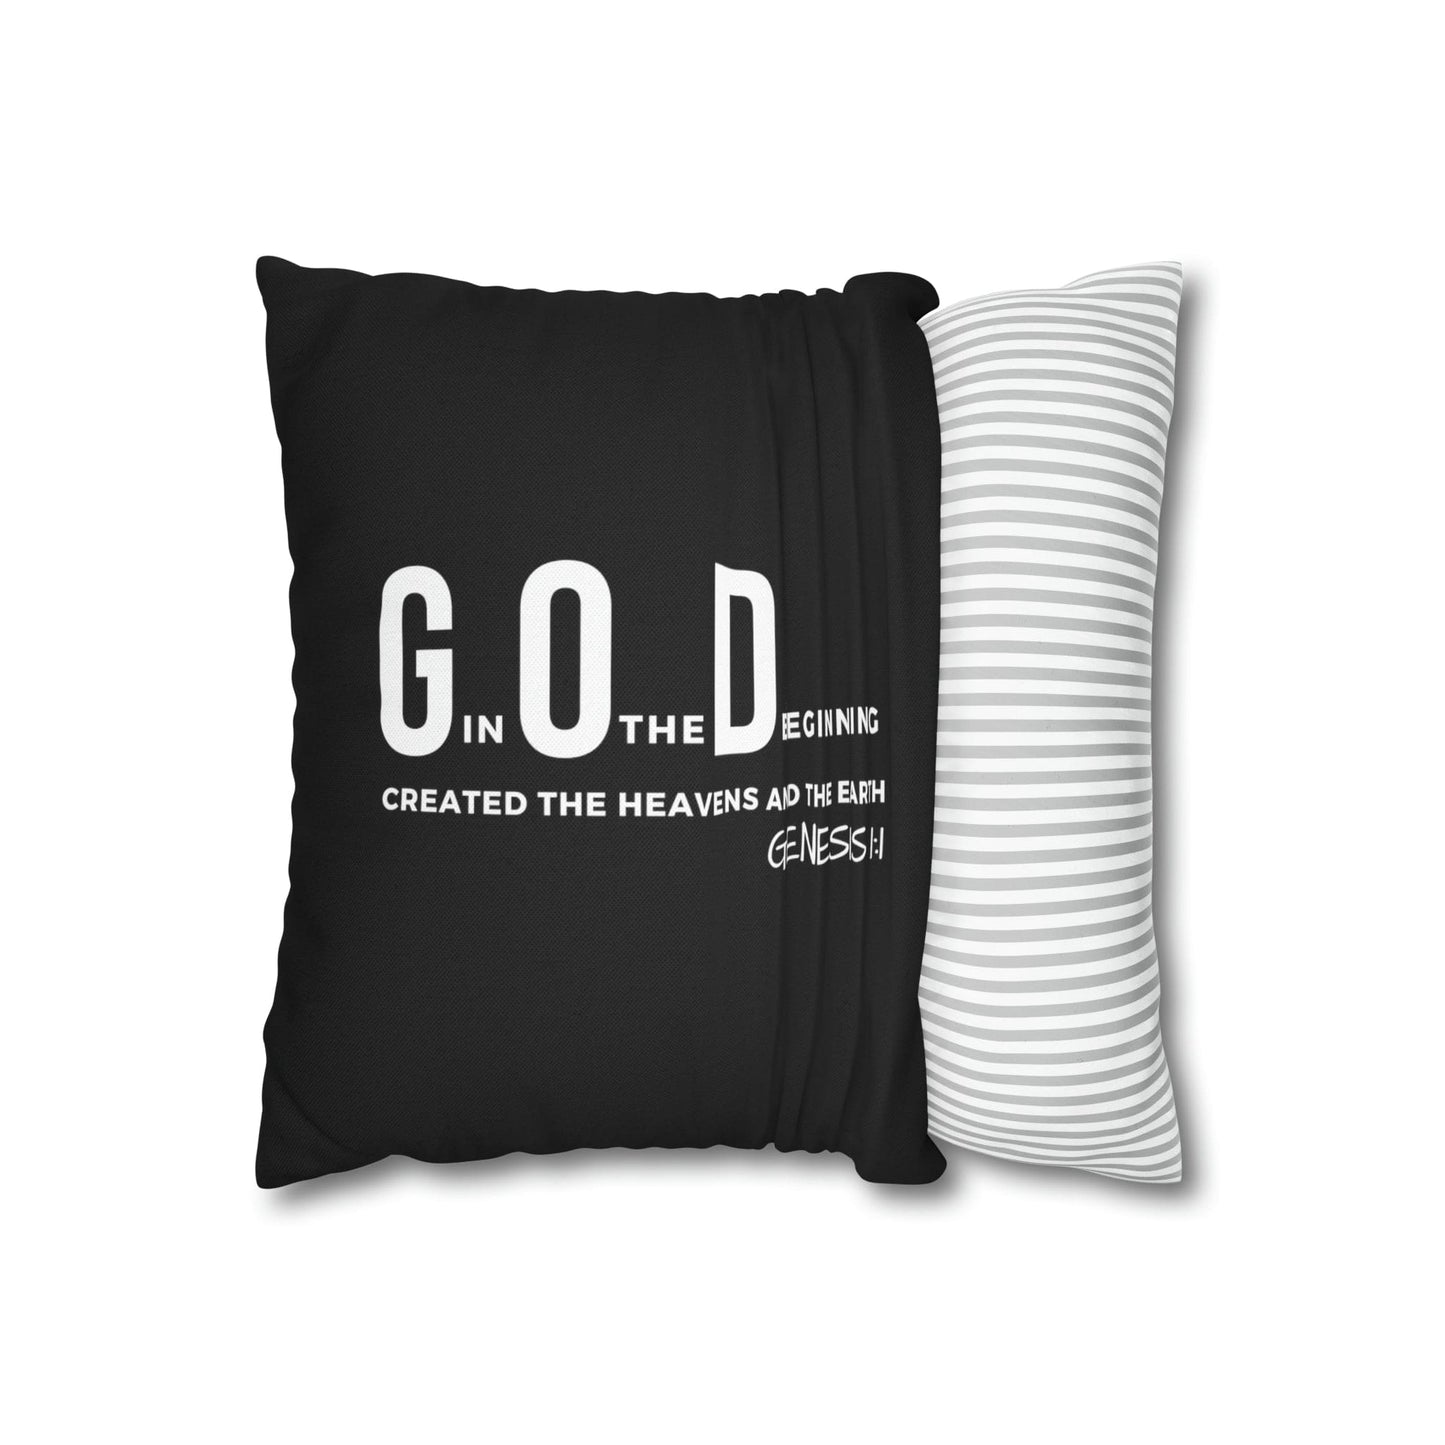 Decorative Throw Pillow Cover - Set Of 2, God In The Beginning Created The Heavens And The Earth - Scripture Verse-10